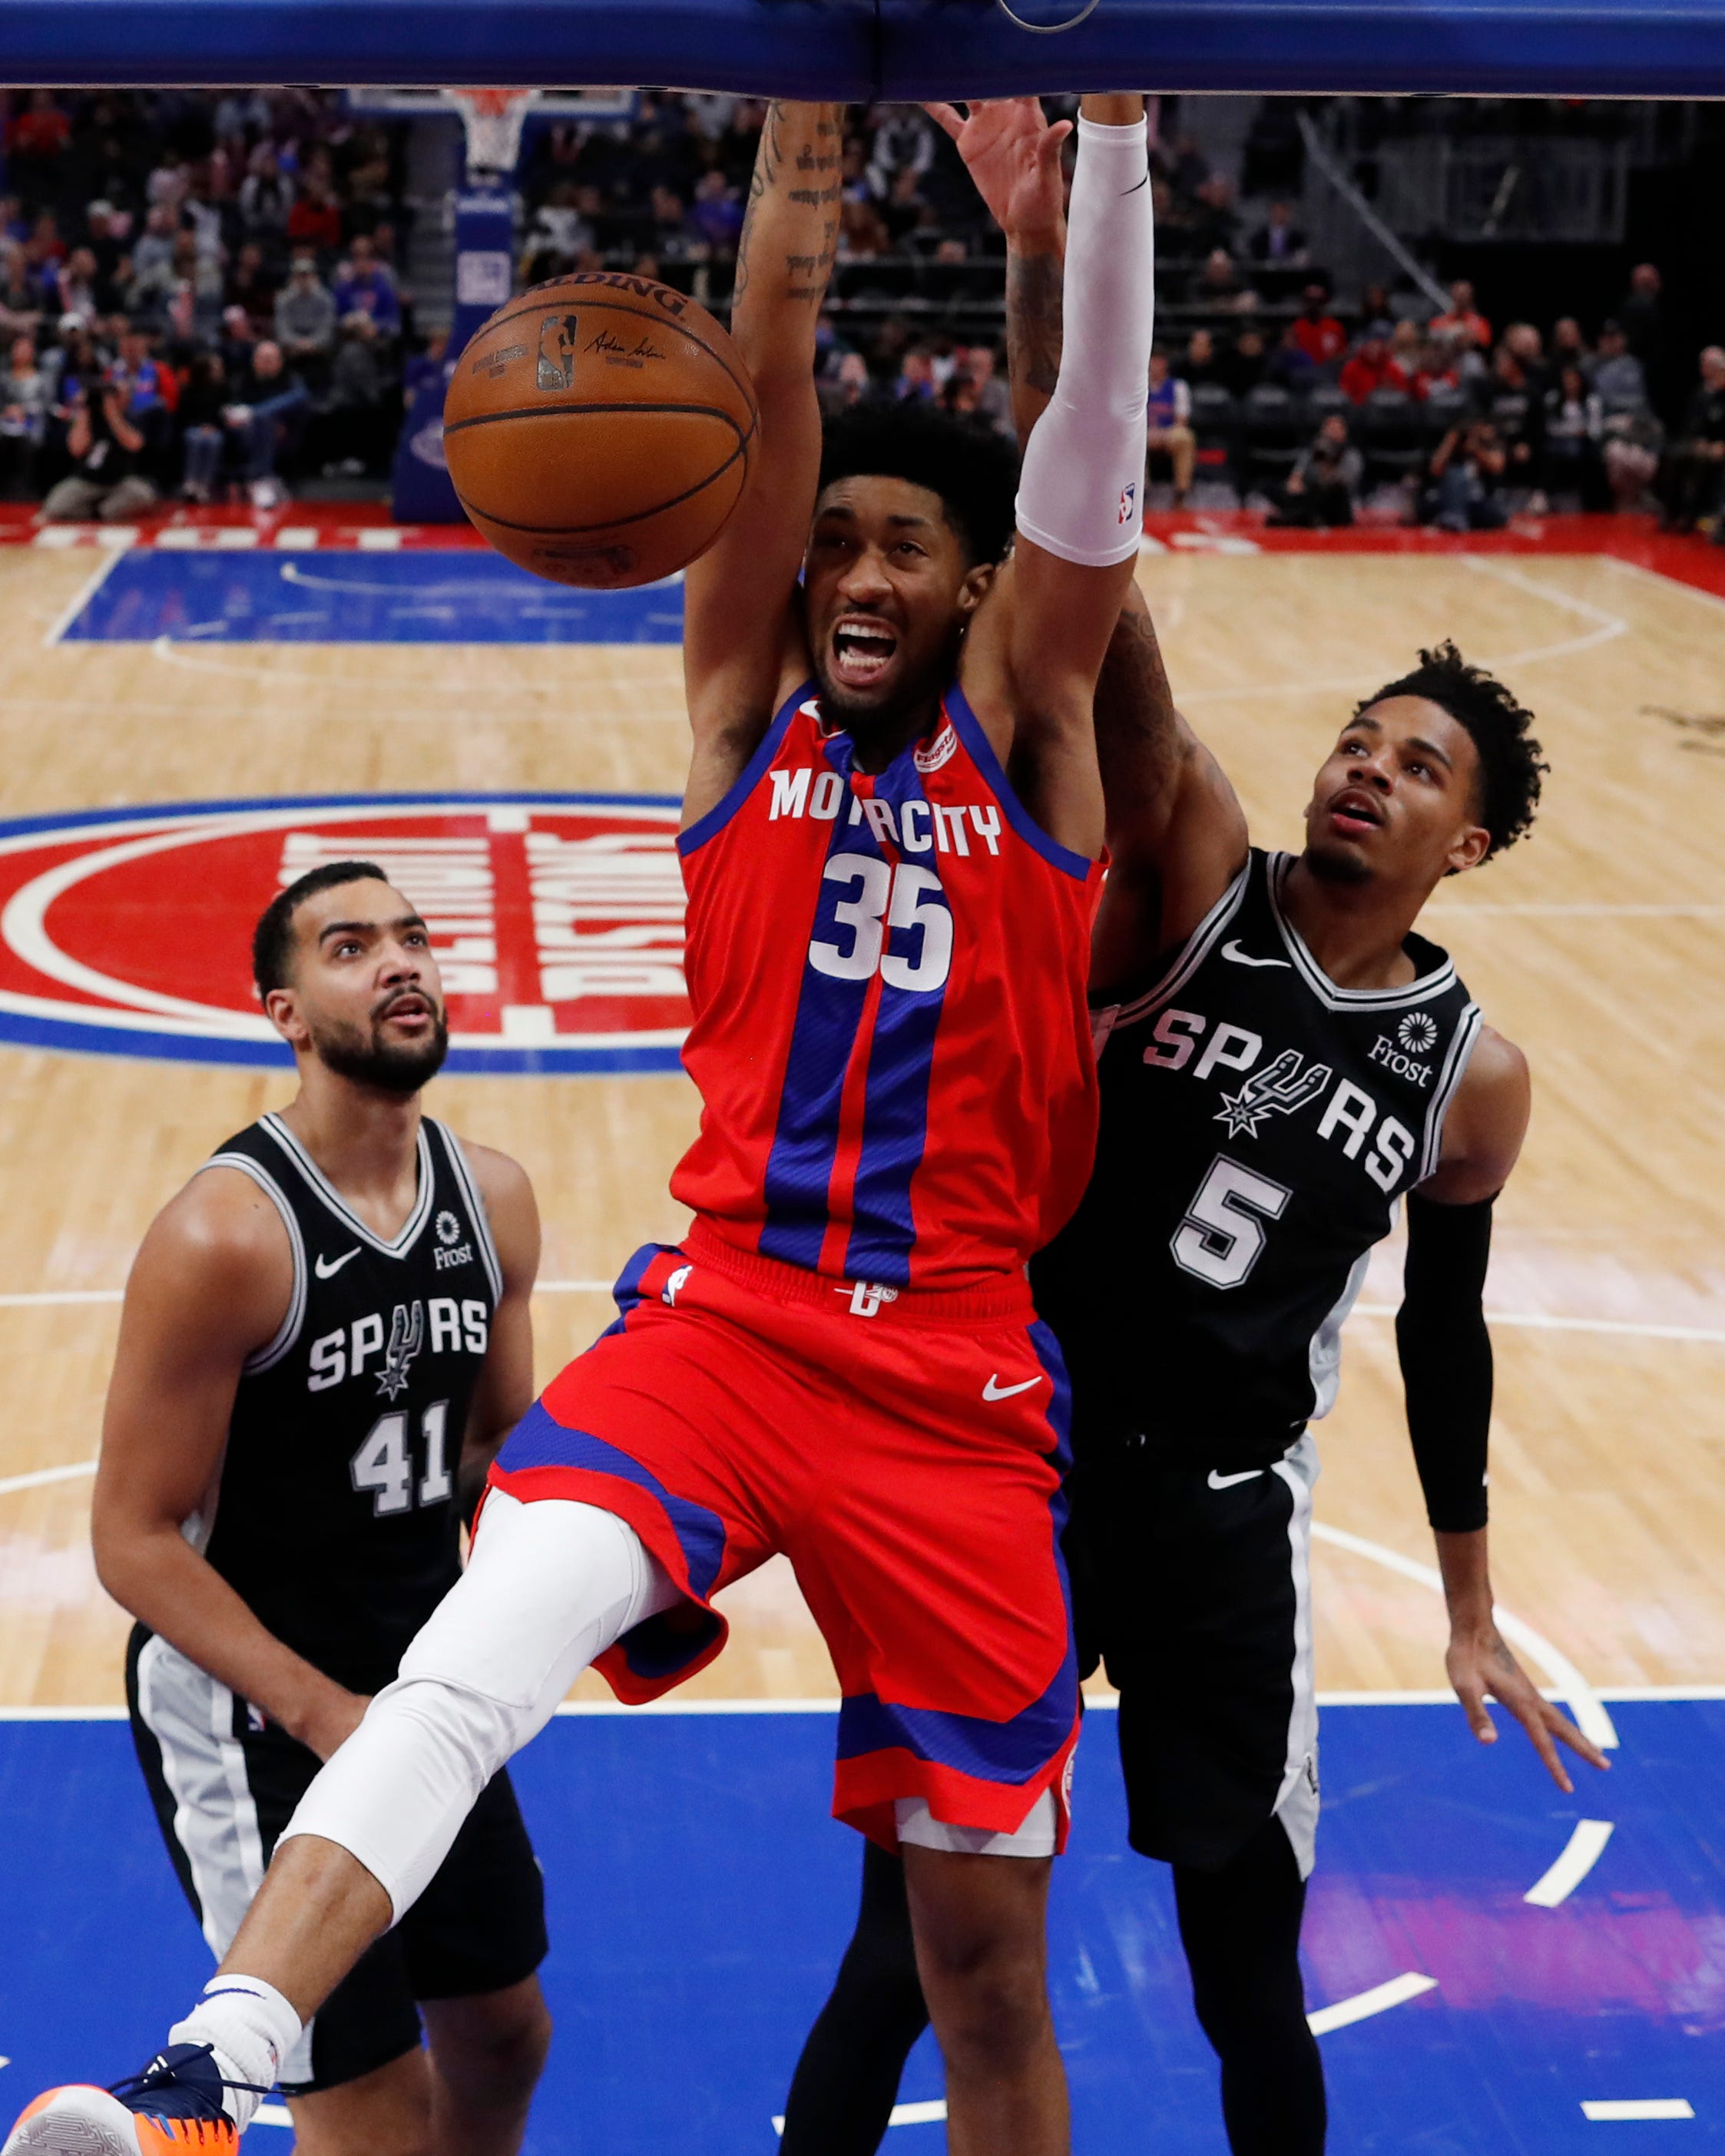 Detroit Pistons forward Christian Wood (35) dunks as San Antonio Spurs guard Dejounte Murray (5) defends during the second half of the Pistons ' 132-98 victory on Sunday, Dec. 1, 2019, in Detroit.